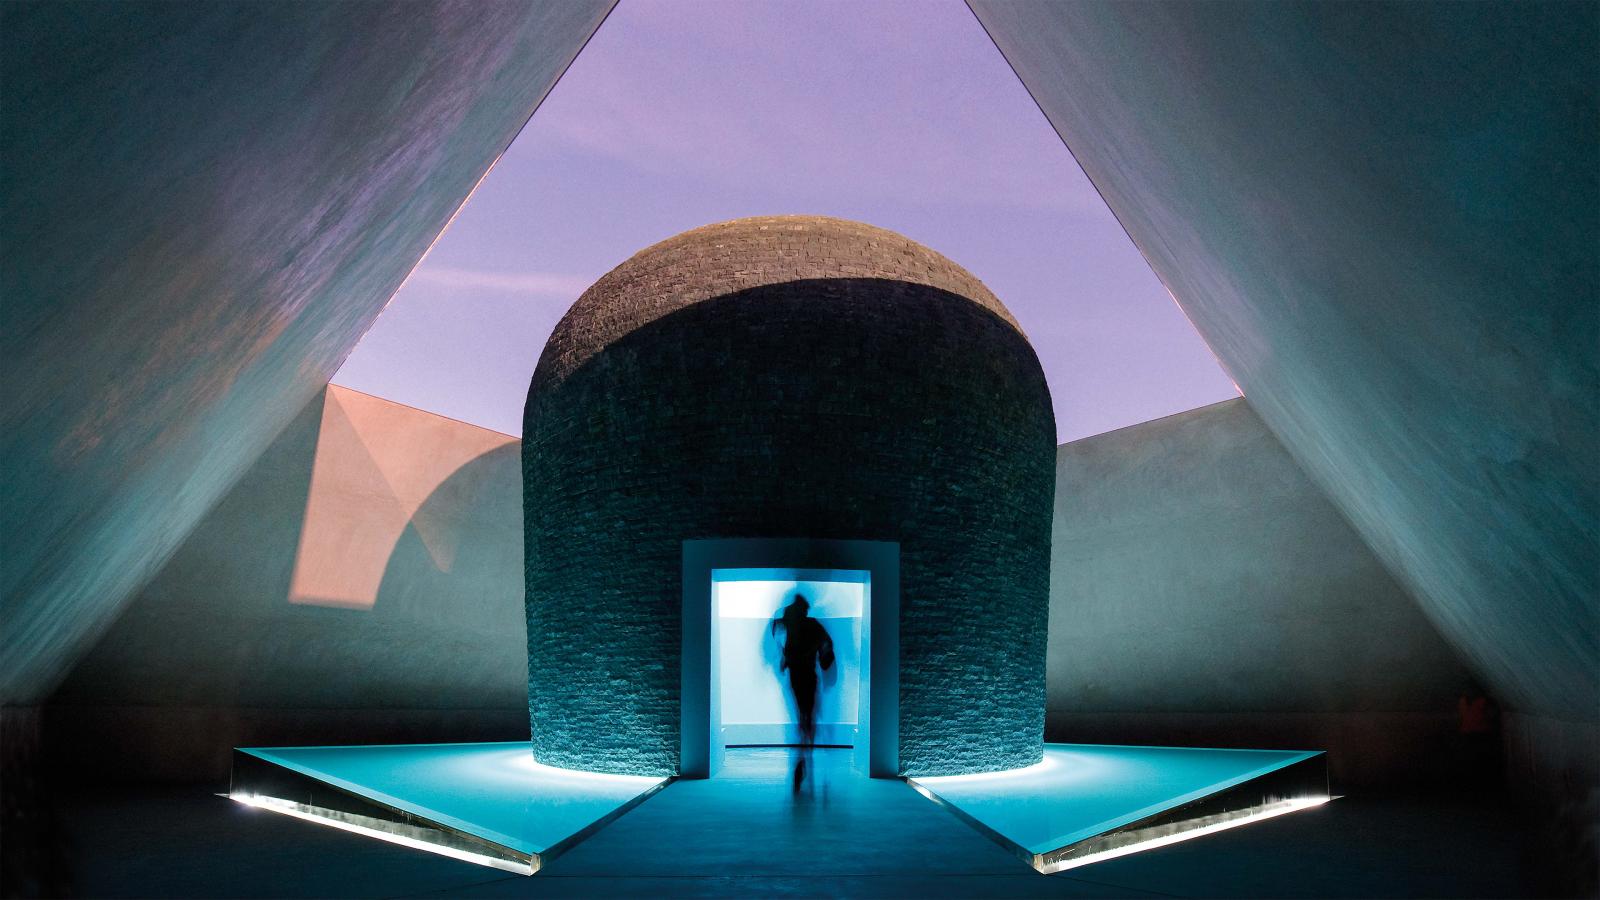 A person walks through a futuristic, dimly lit triangular hallway with a dome-shaped structure in the center, illuminated by blue light. The geometric space features sharp angles, creating a surreal, otherworldly atmosphere reminiscent of an exhibit at the NGA's Australian Garden.